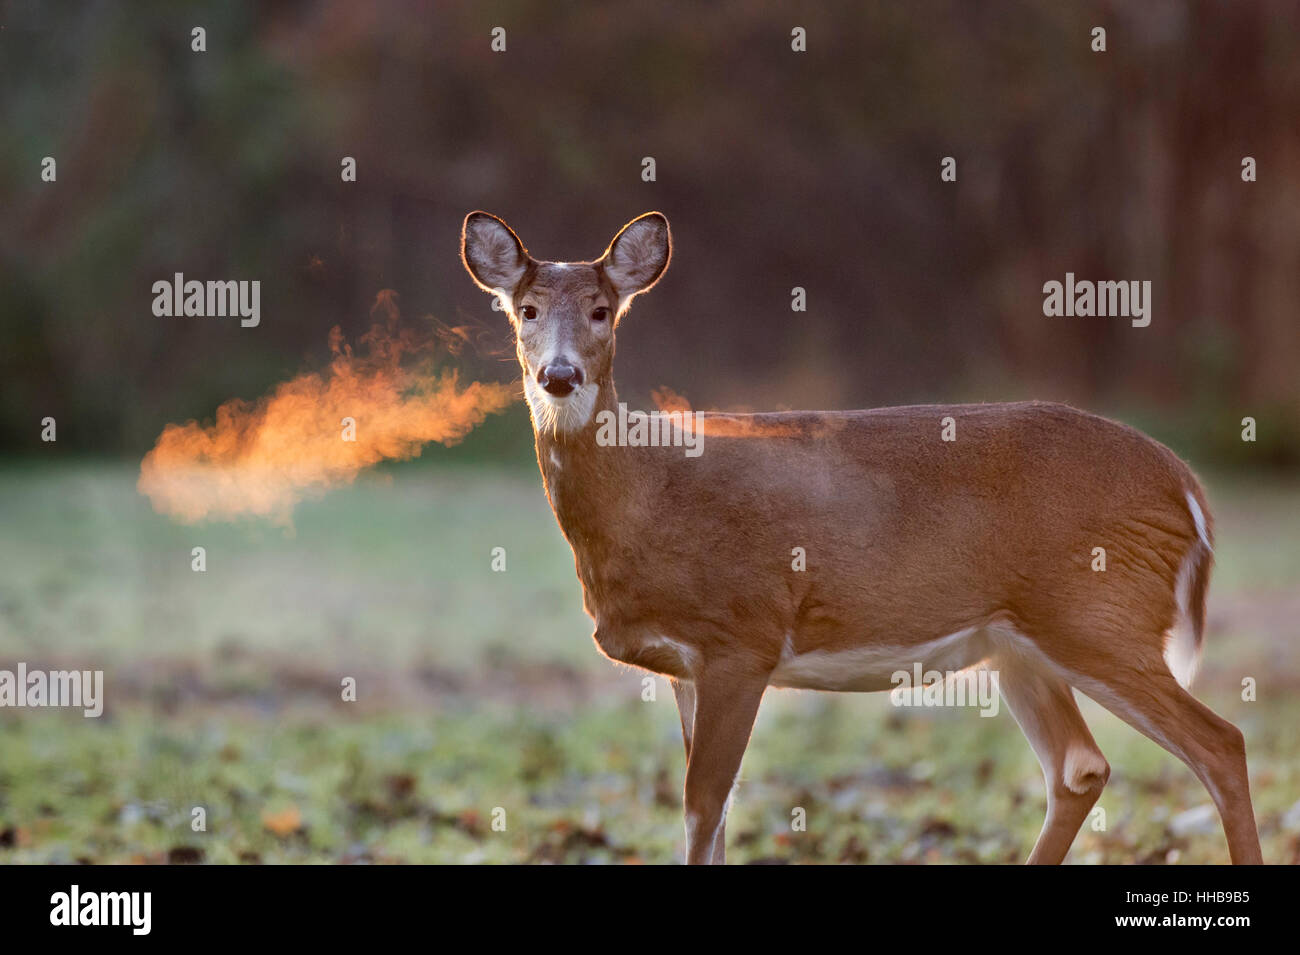 This whitetail deer was clearing out her nostrils, just as the sun was coming up behind her.  The sun lit up the warm air with a lovely orange glow. Stock Photo